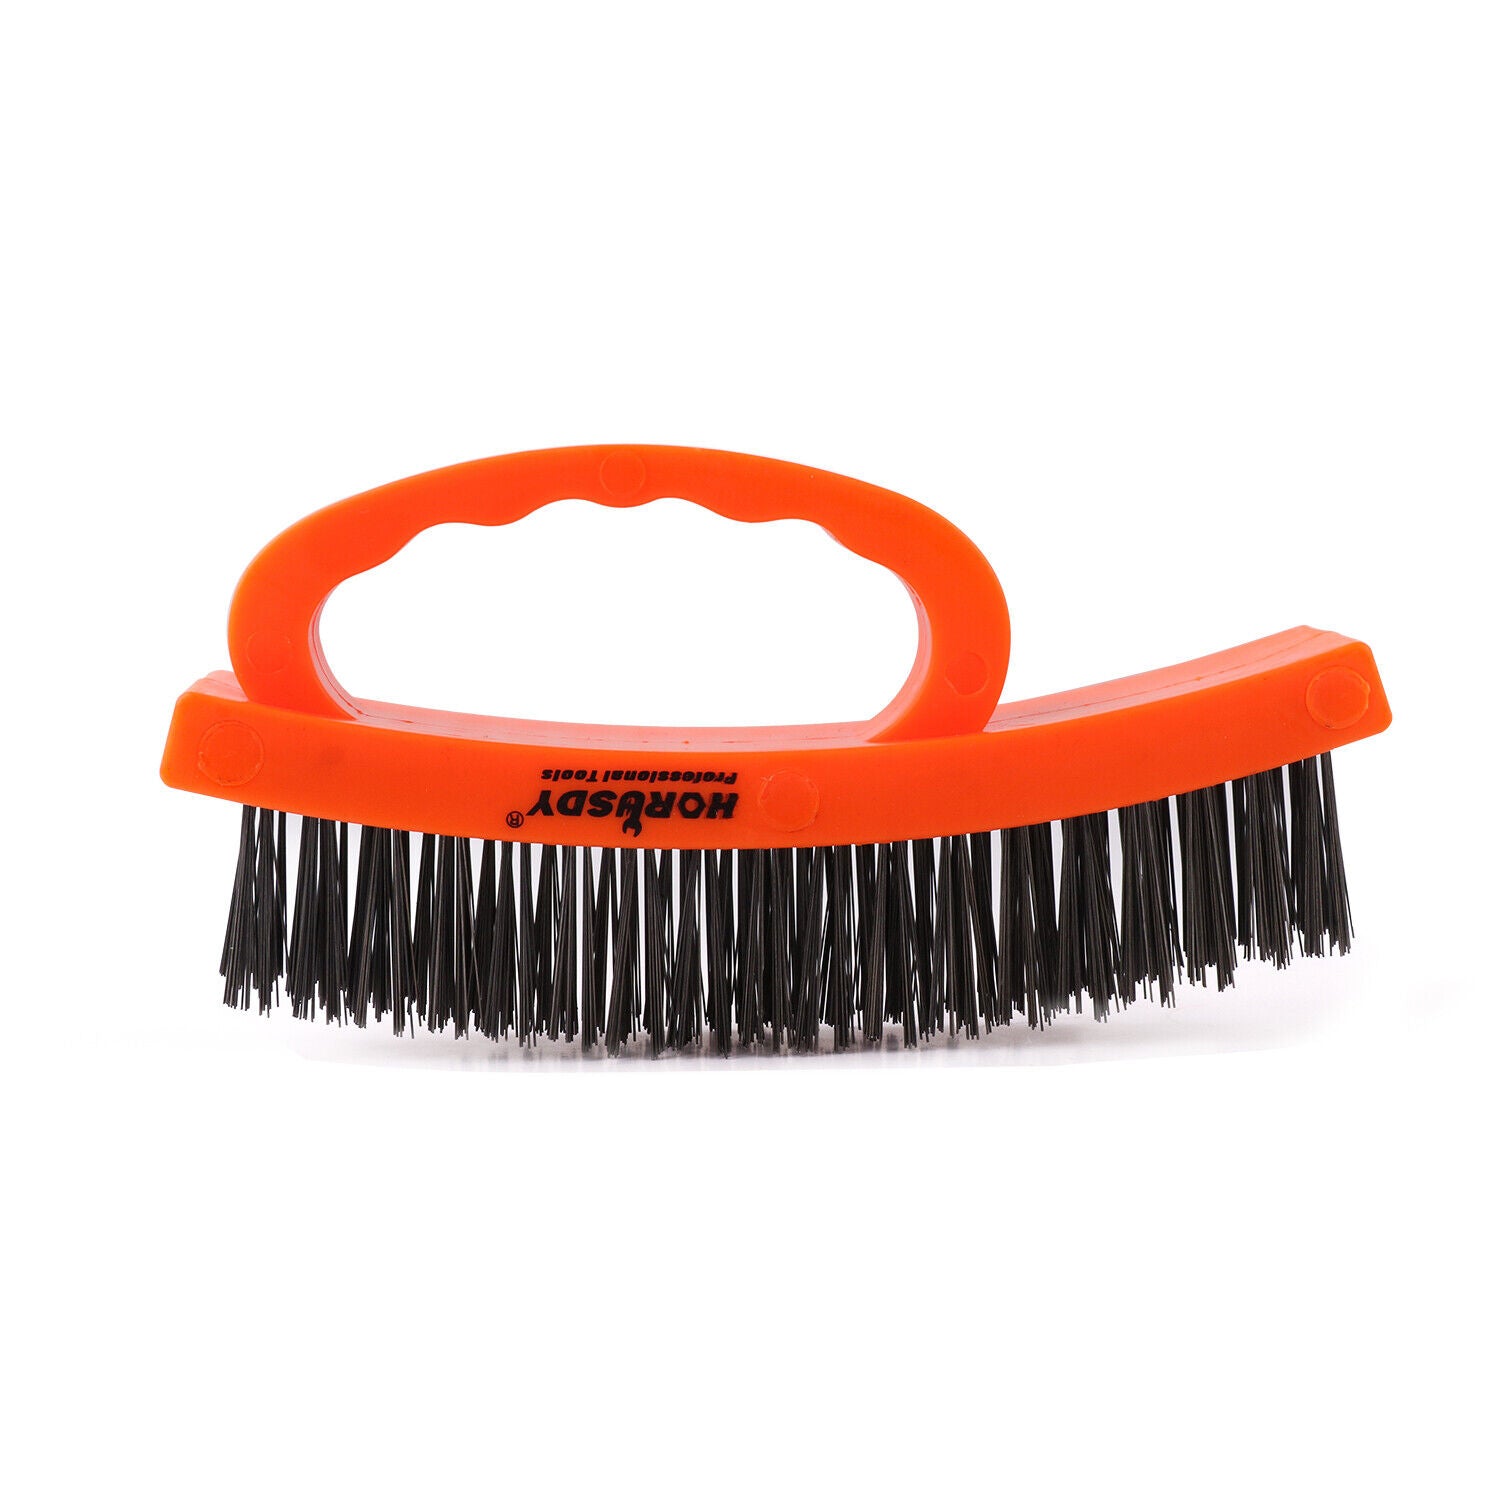 Stainless steel wire brush, 165CM length with a comfortable grip handle for effective cleaning on hard surfaces